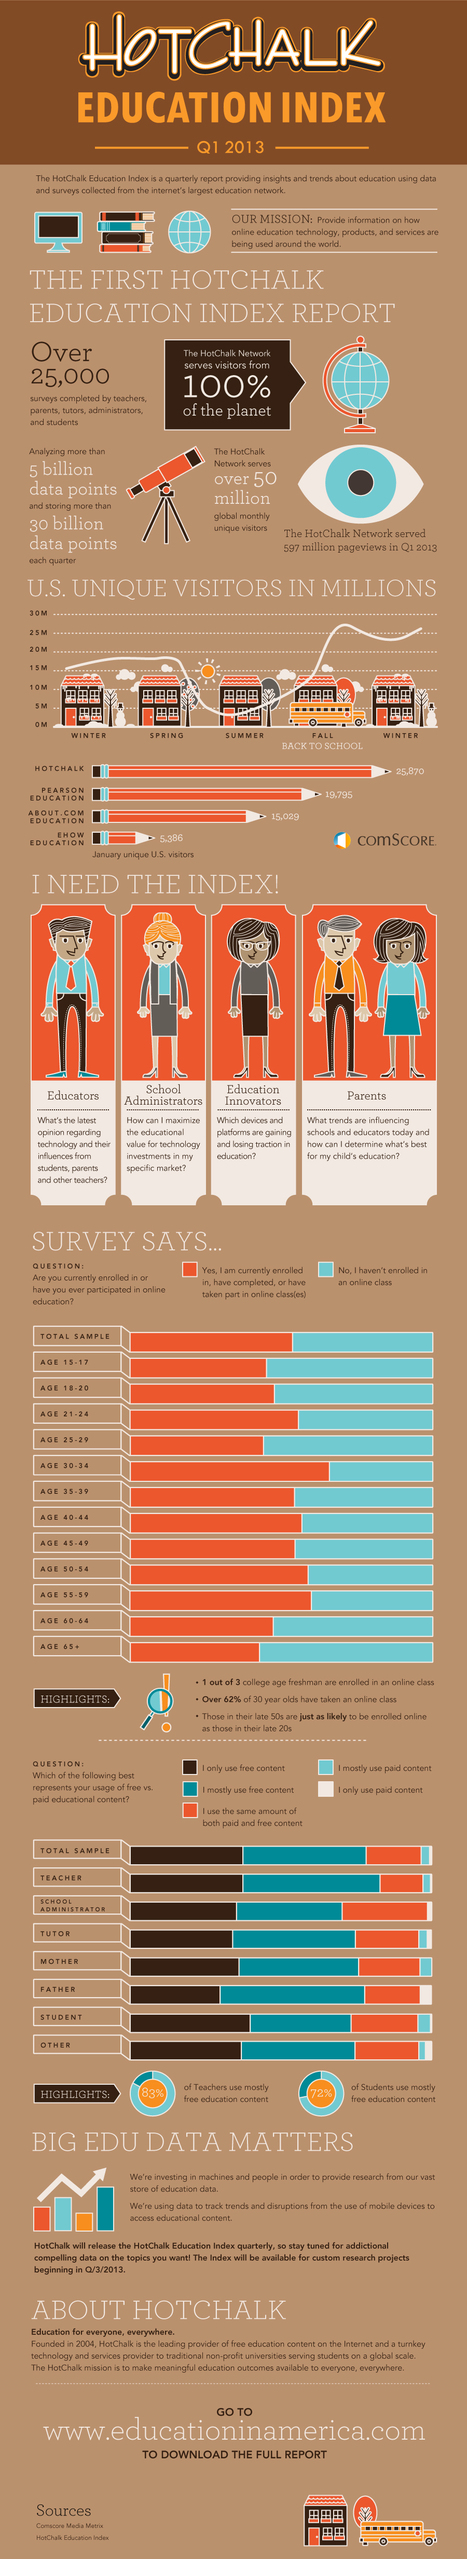 New Survey Uncovers Big Trends In Online Learning [Infographic] | Strictly pedagogical | Scoop.it